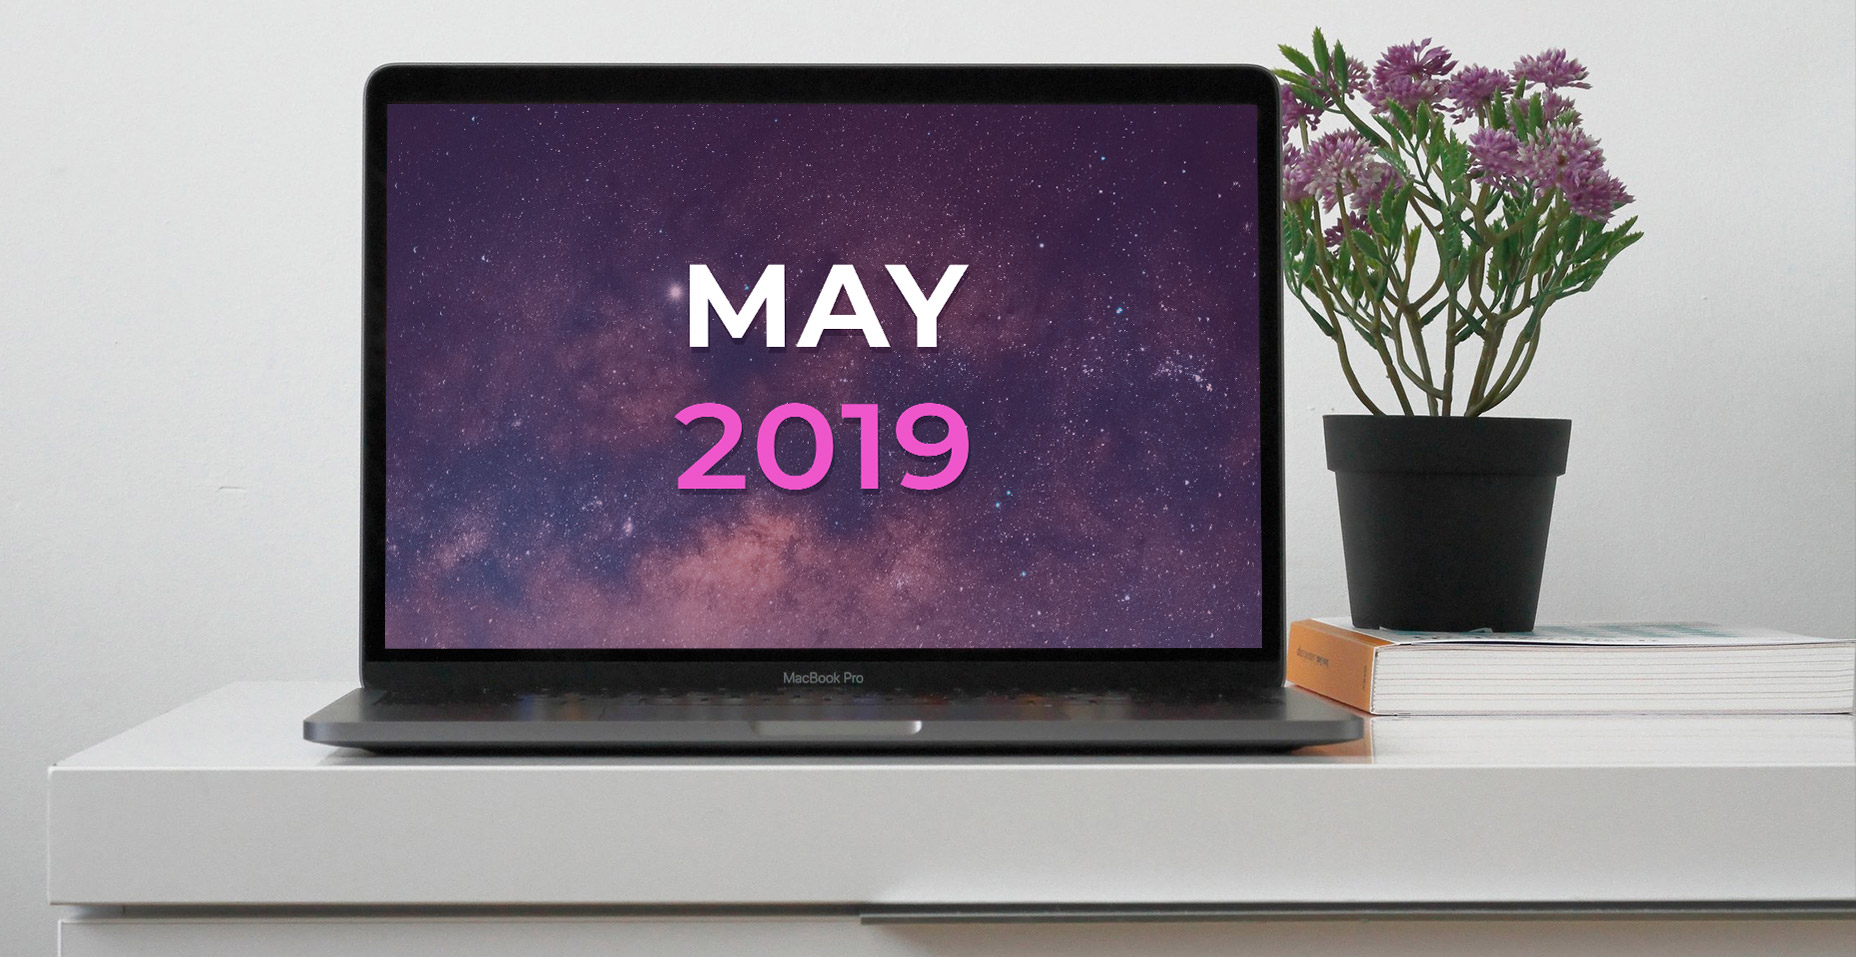 10 Interesting JavaScript and CSS Libraries for May 2019